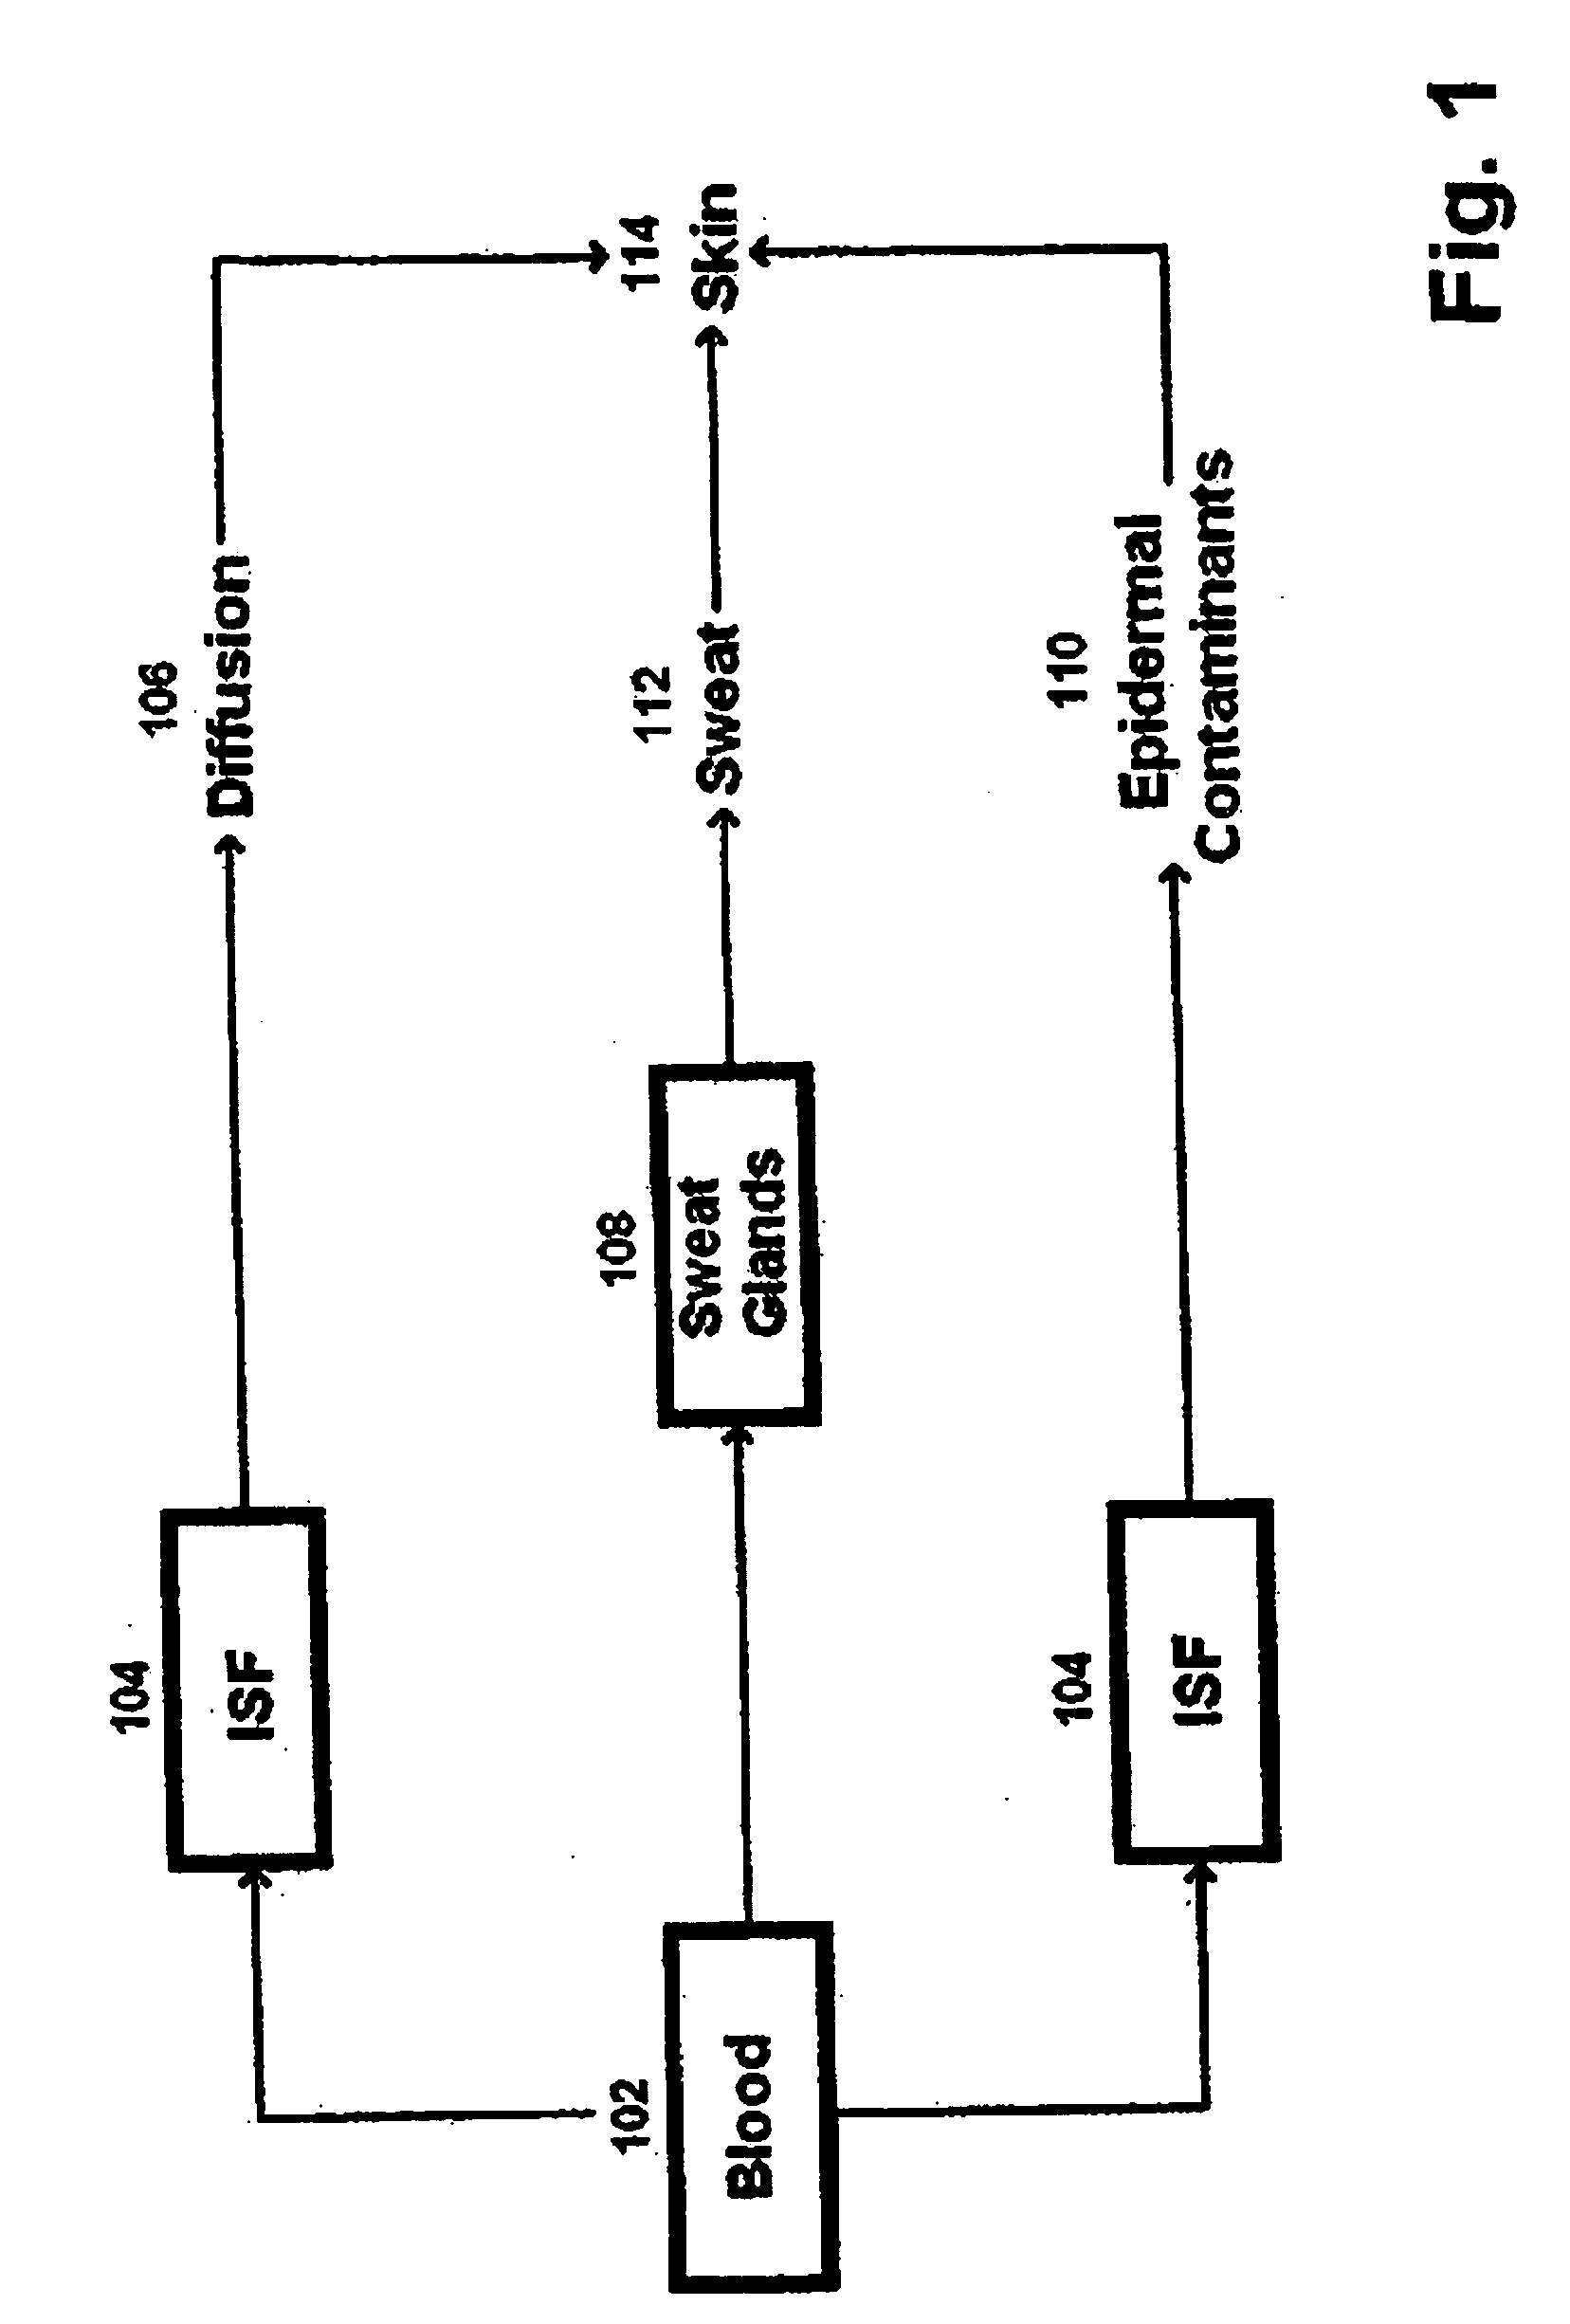 Patches, systems, and methods for non-invasive glucose measurement